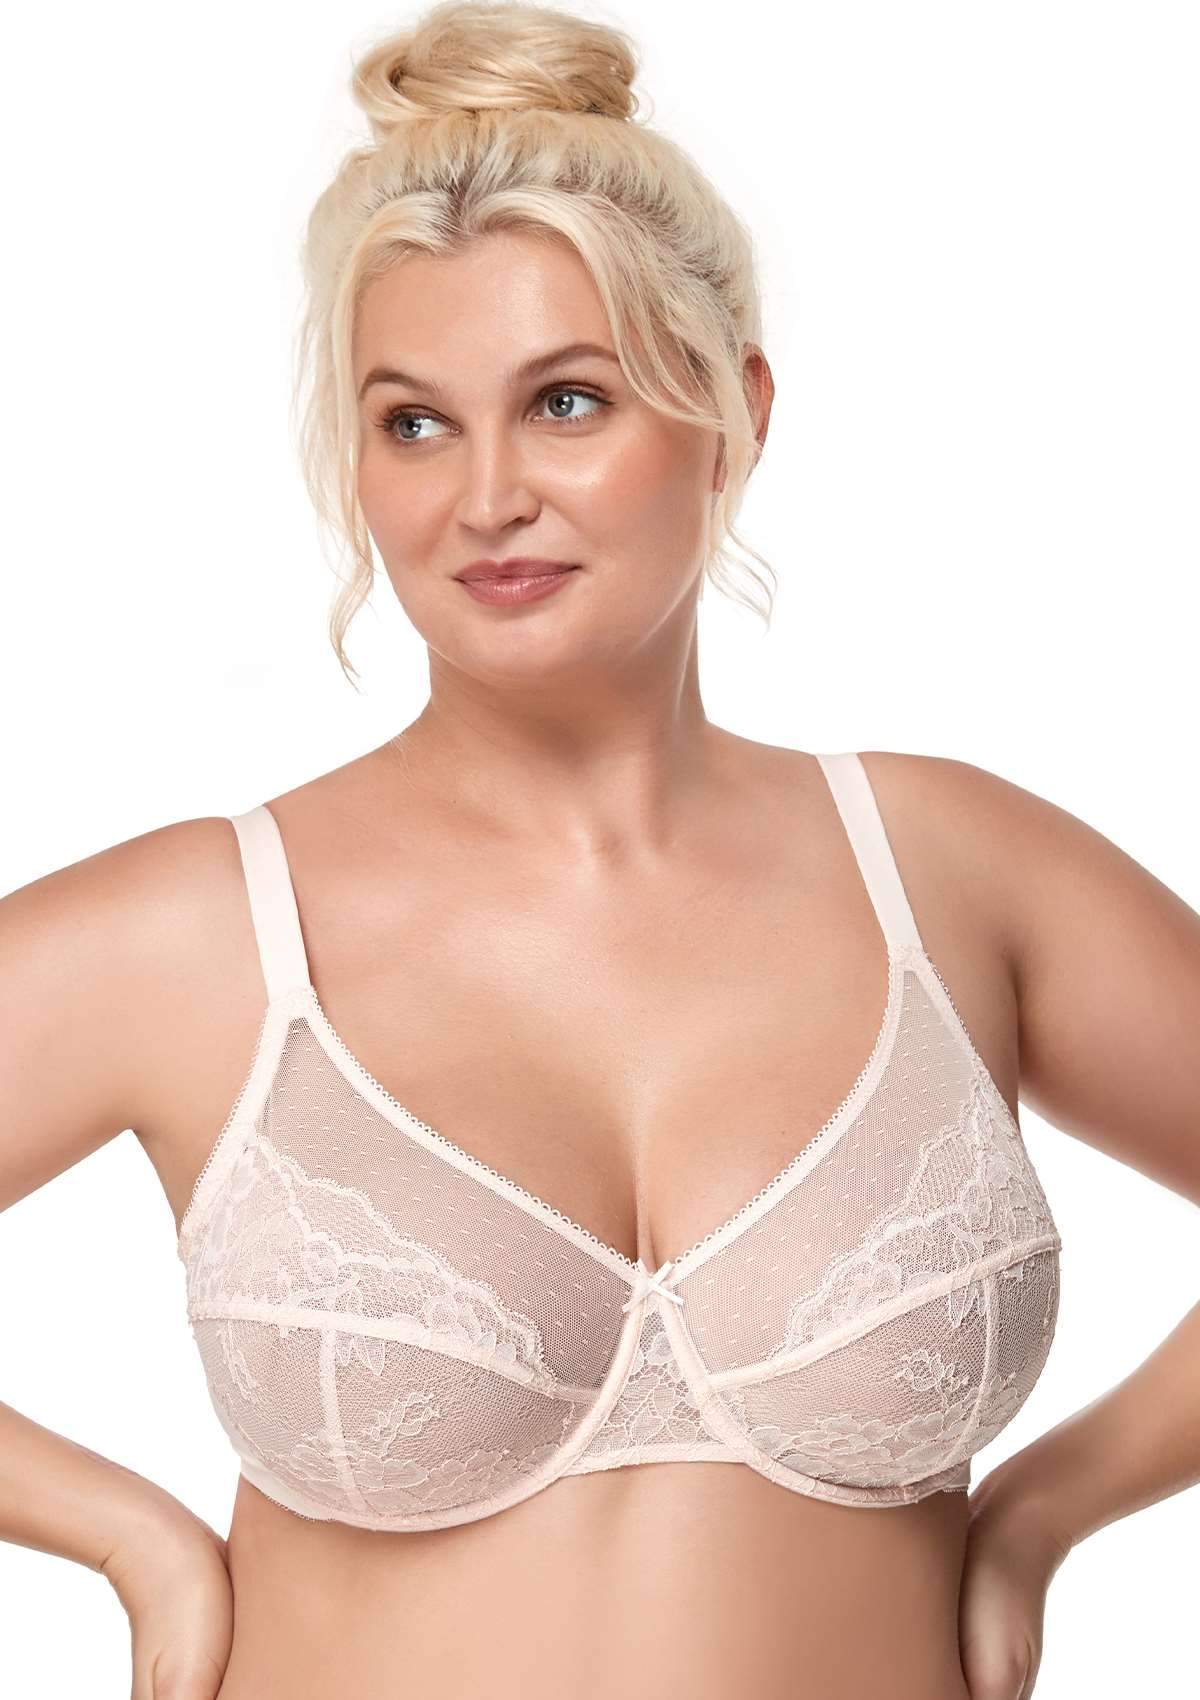 HSIA Enchante Lacy Bra: Comfy Sheer Lace Bra With Lift - Dusty Peach / 34 / G